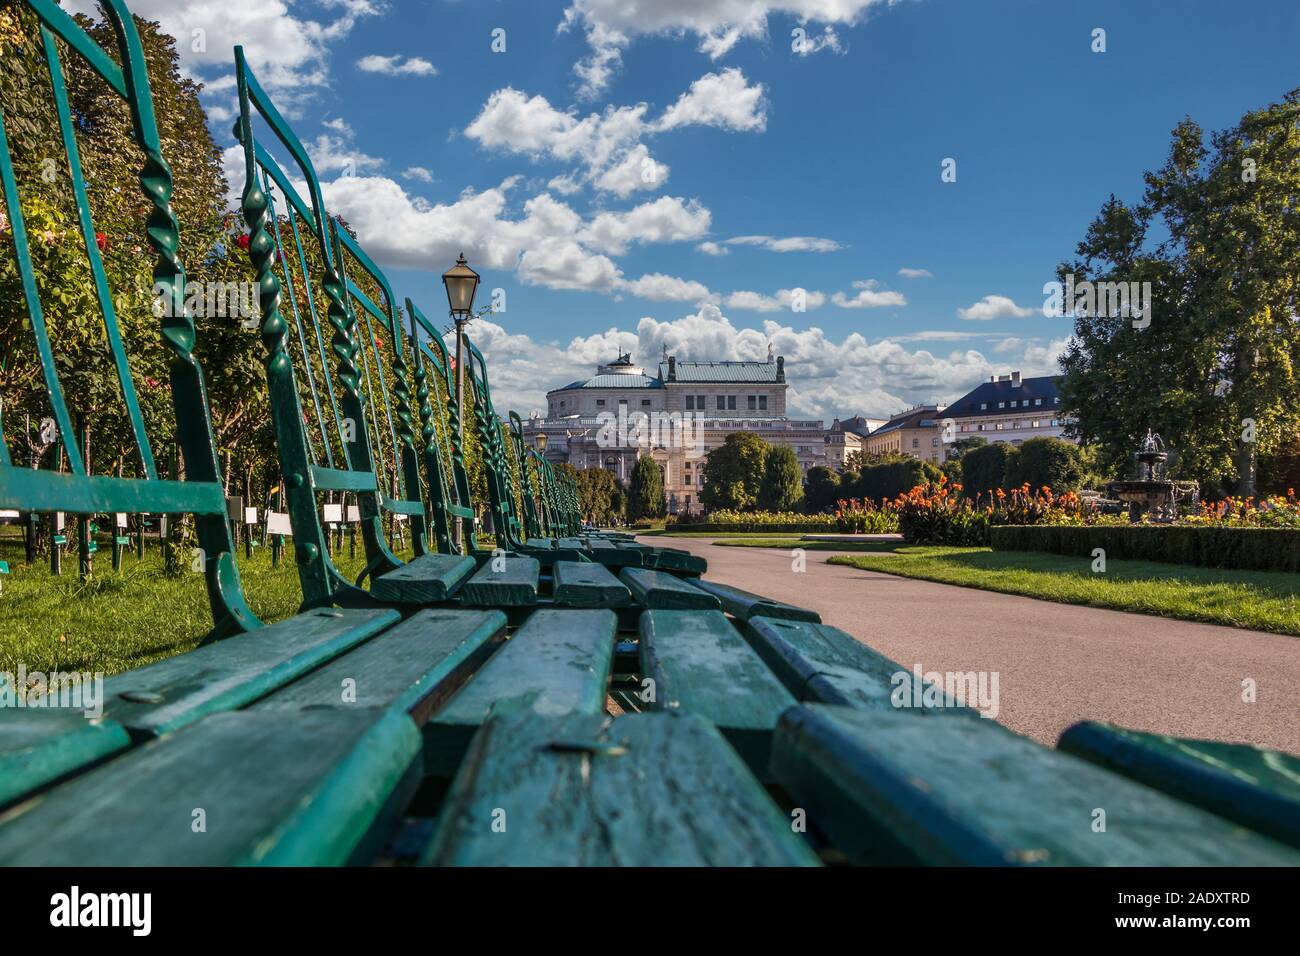 Green Chairs In The Volksgarten People S Garden In Vienna With A